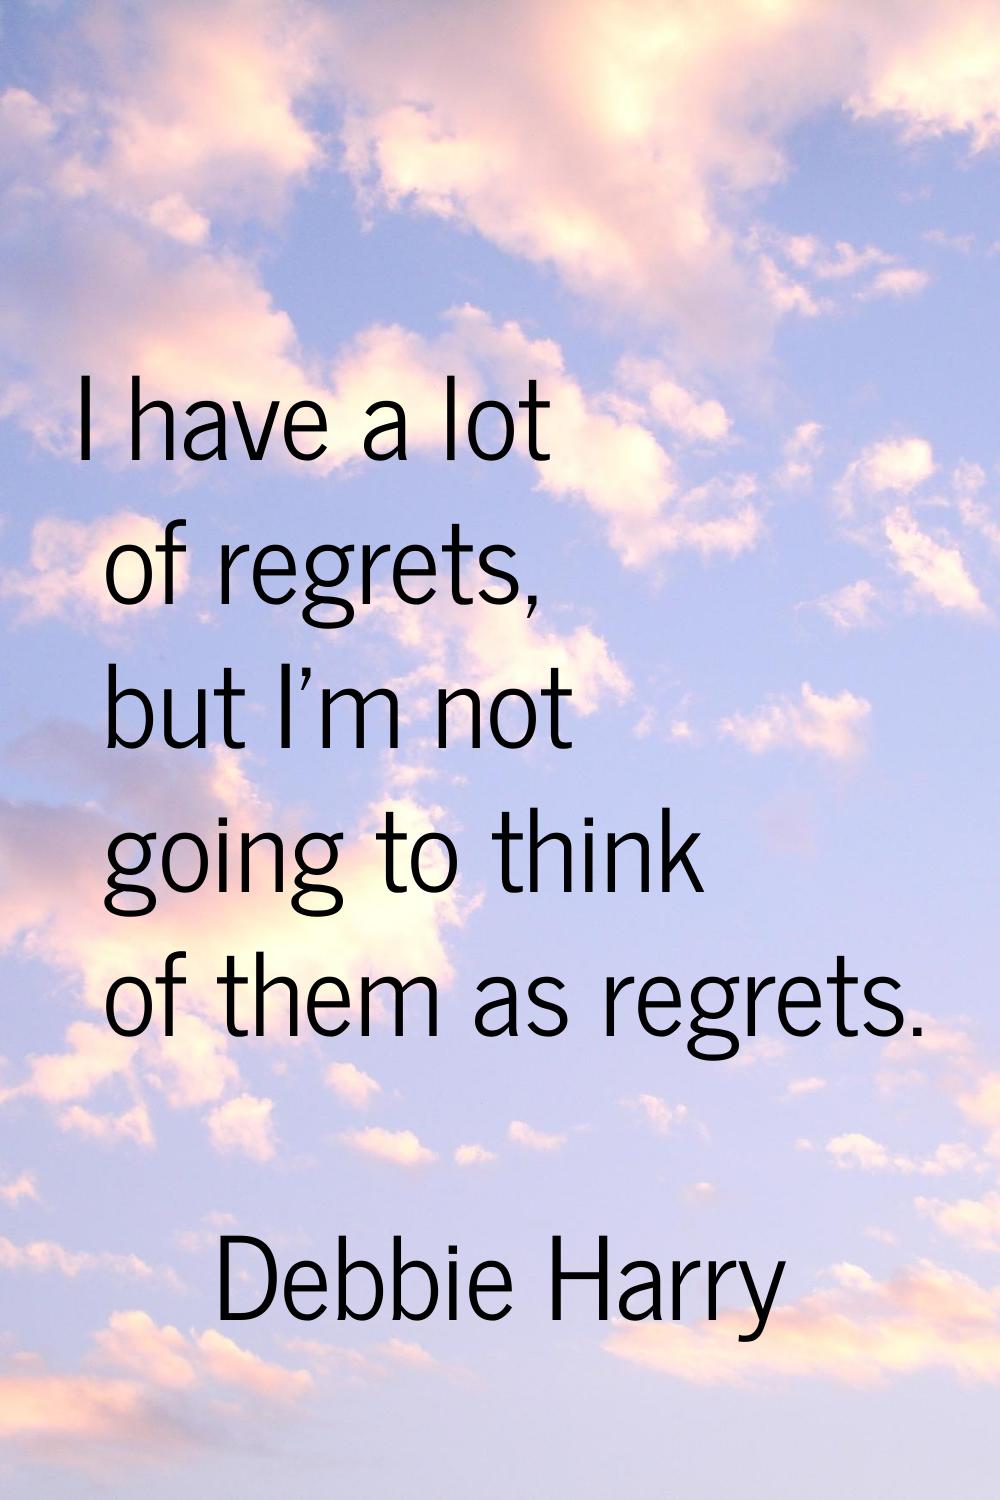 I have a lot of regrets, but I'm not going to think of them as regrets.